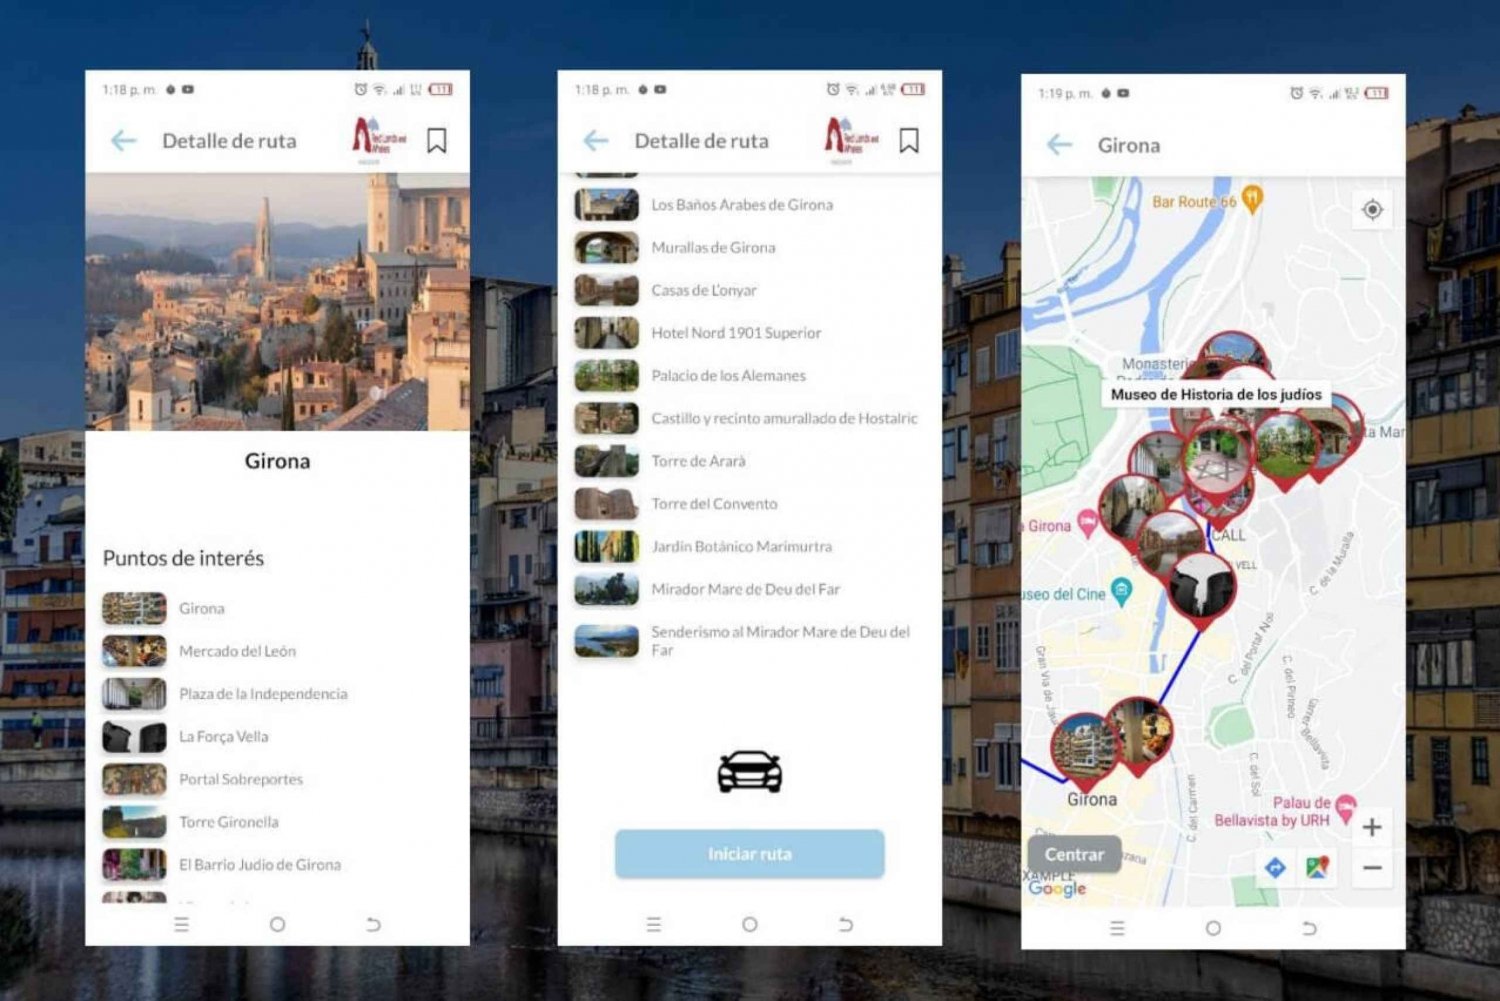 Girona self-guided tour app with multilingual audioguide